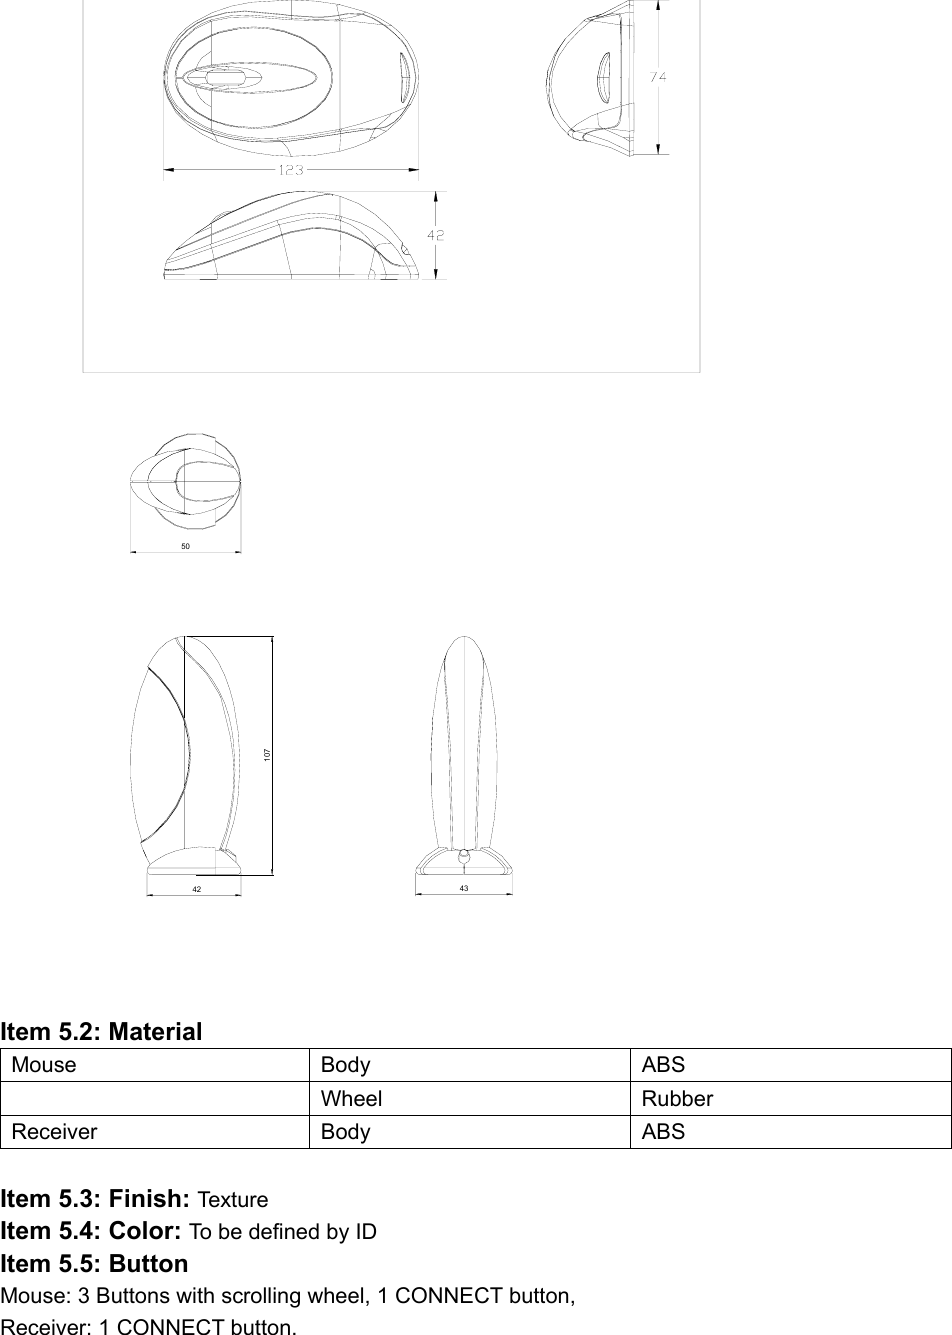  107434250               Item 5.2: Material Mouse Body  ABS  Wheel Rubber Receiver Body  ABS  Item 5.3: Finish: Text ur e Item 5.4: Color: To be defined by ID Item 5.5: Button Mouse: 3 Buttons with scrolling wheel, 1 CONNECT button,   Receiver: 1 CONNECT button. 